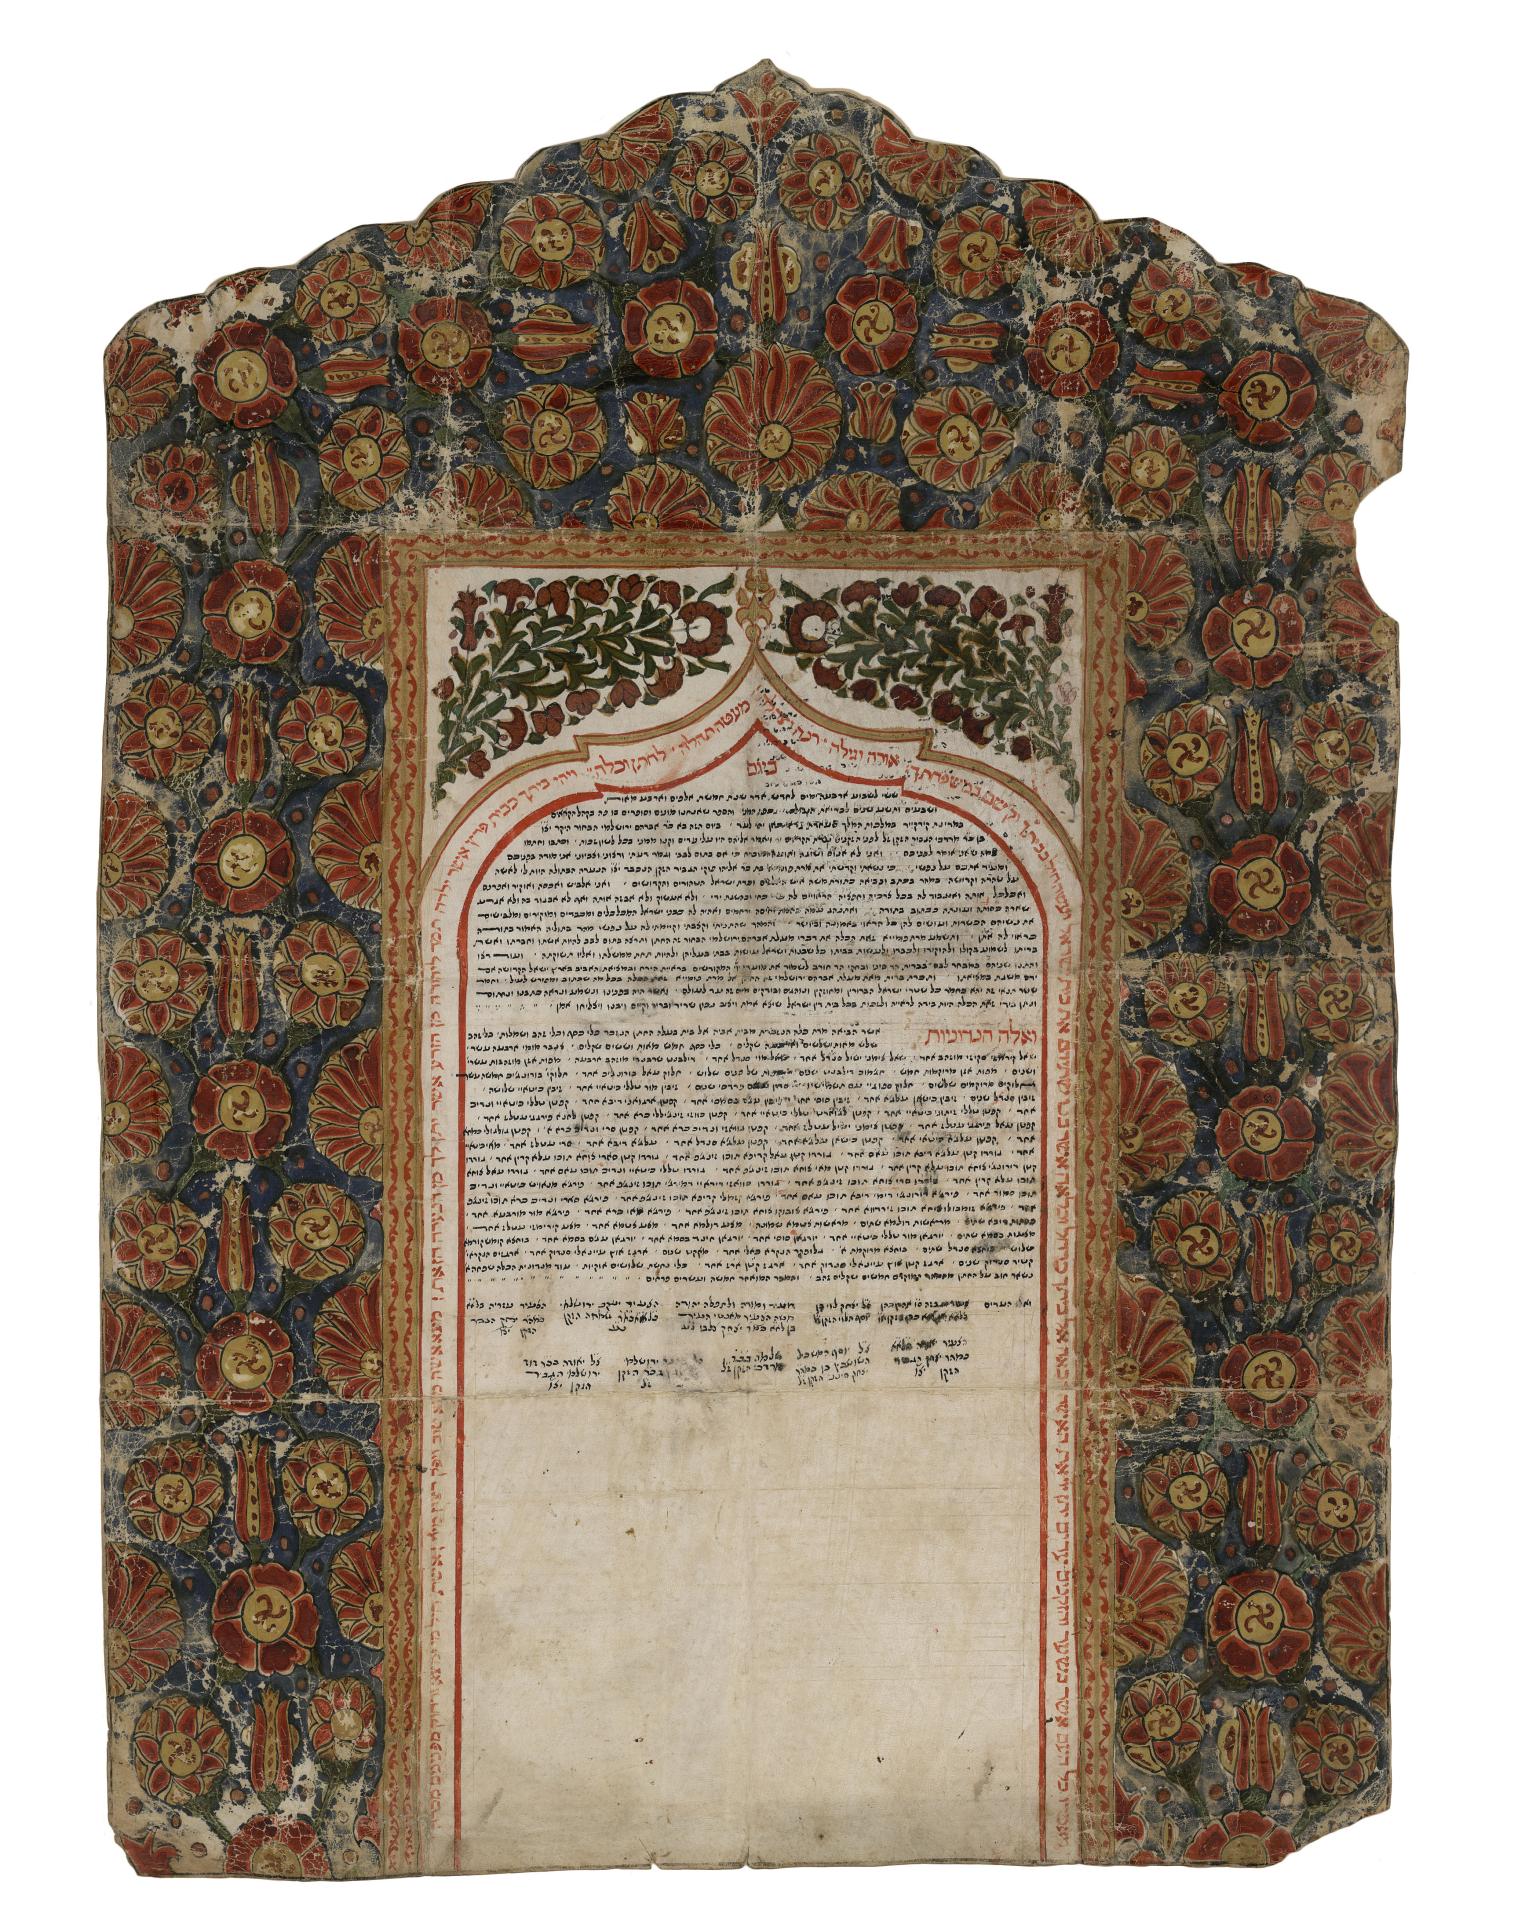 Page of Hebrew text with pointed top and floral border.